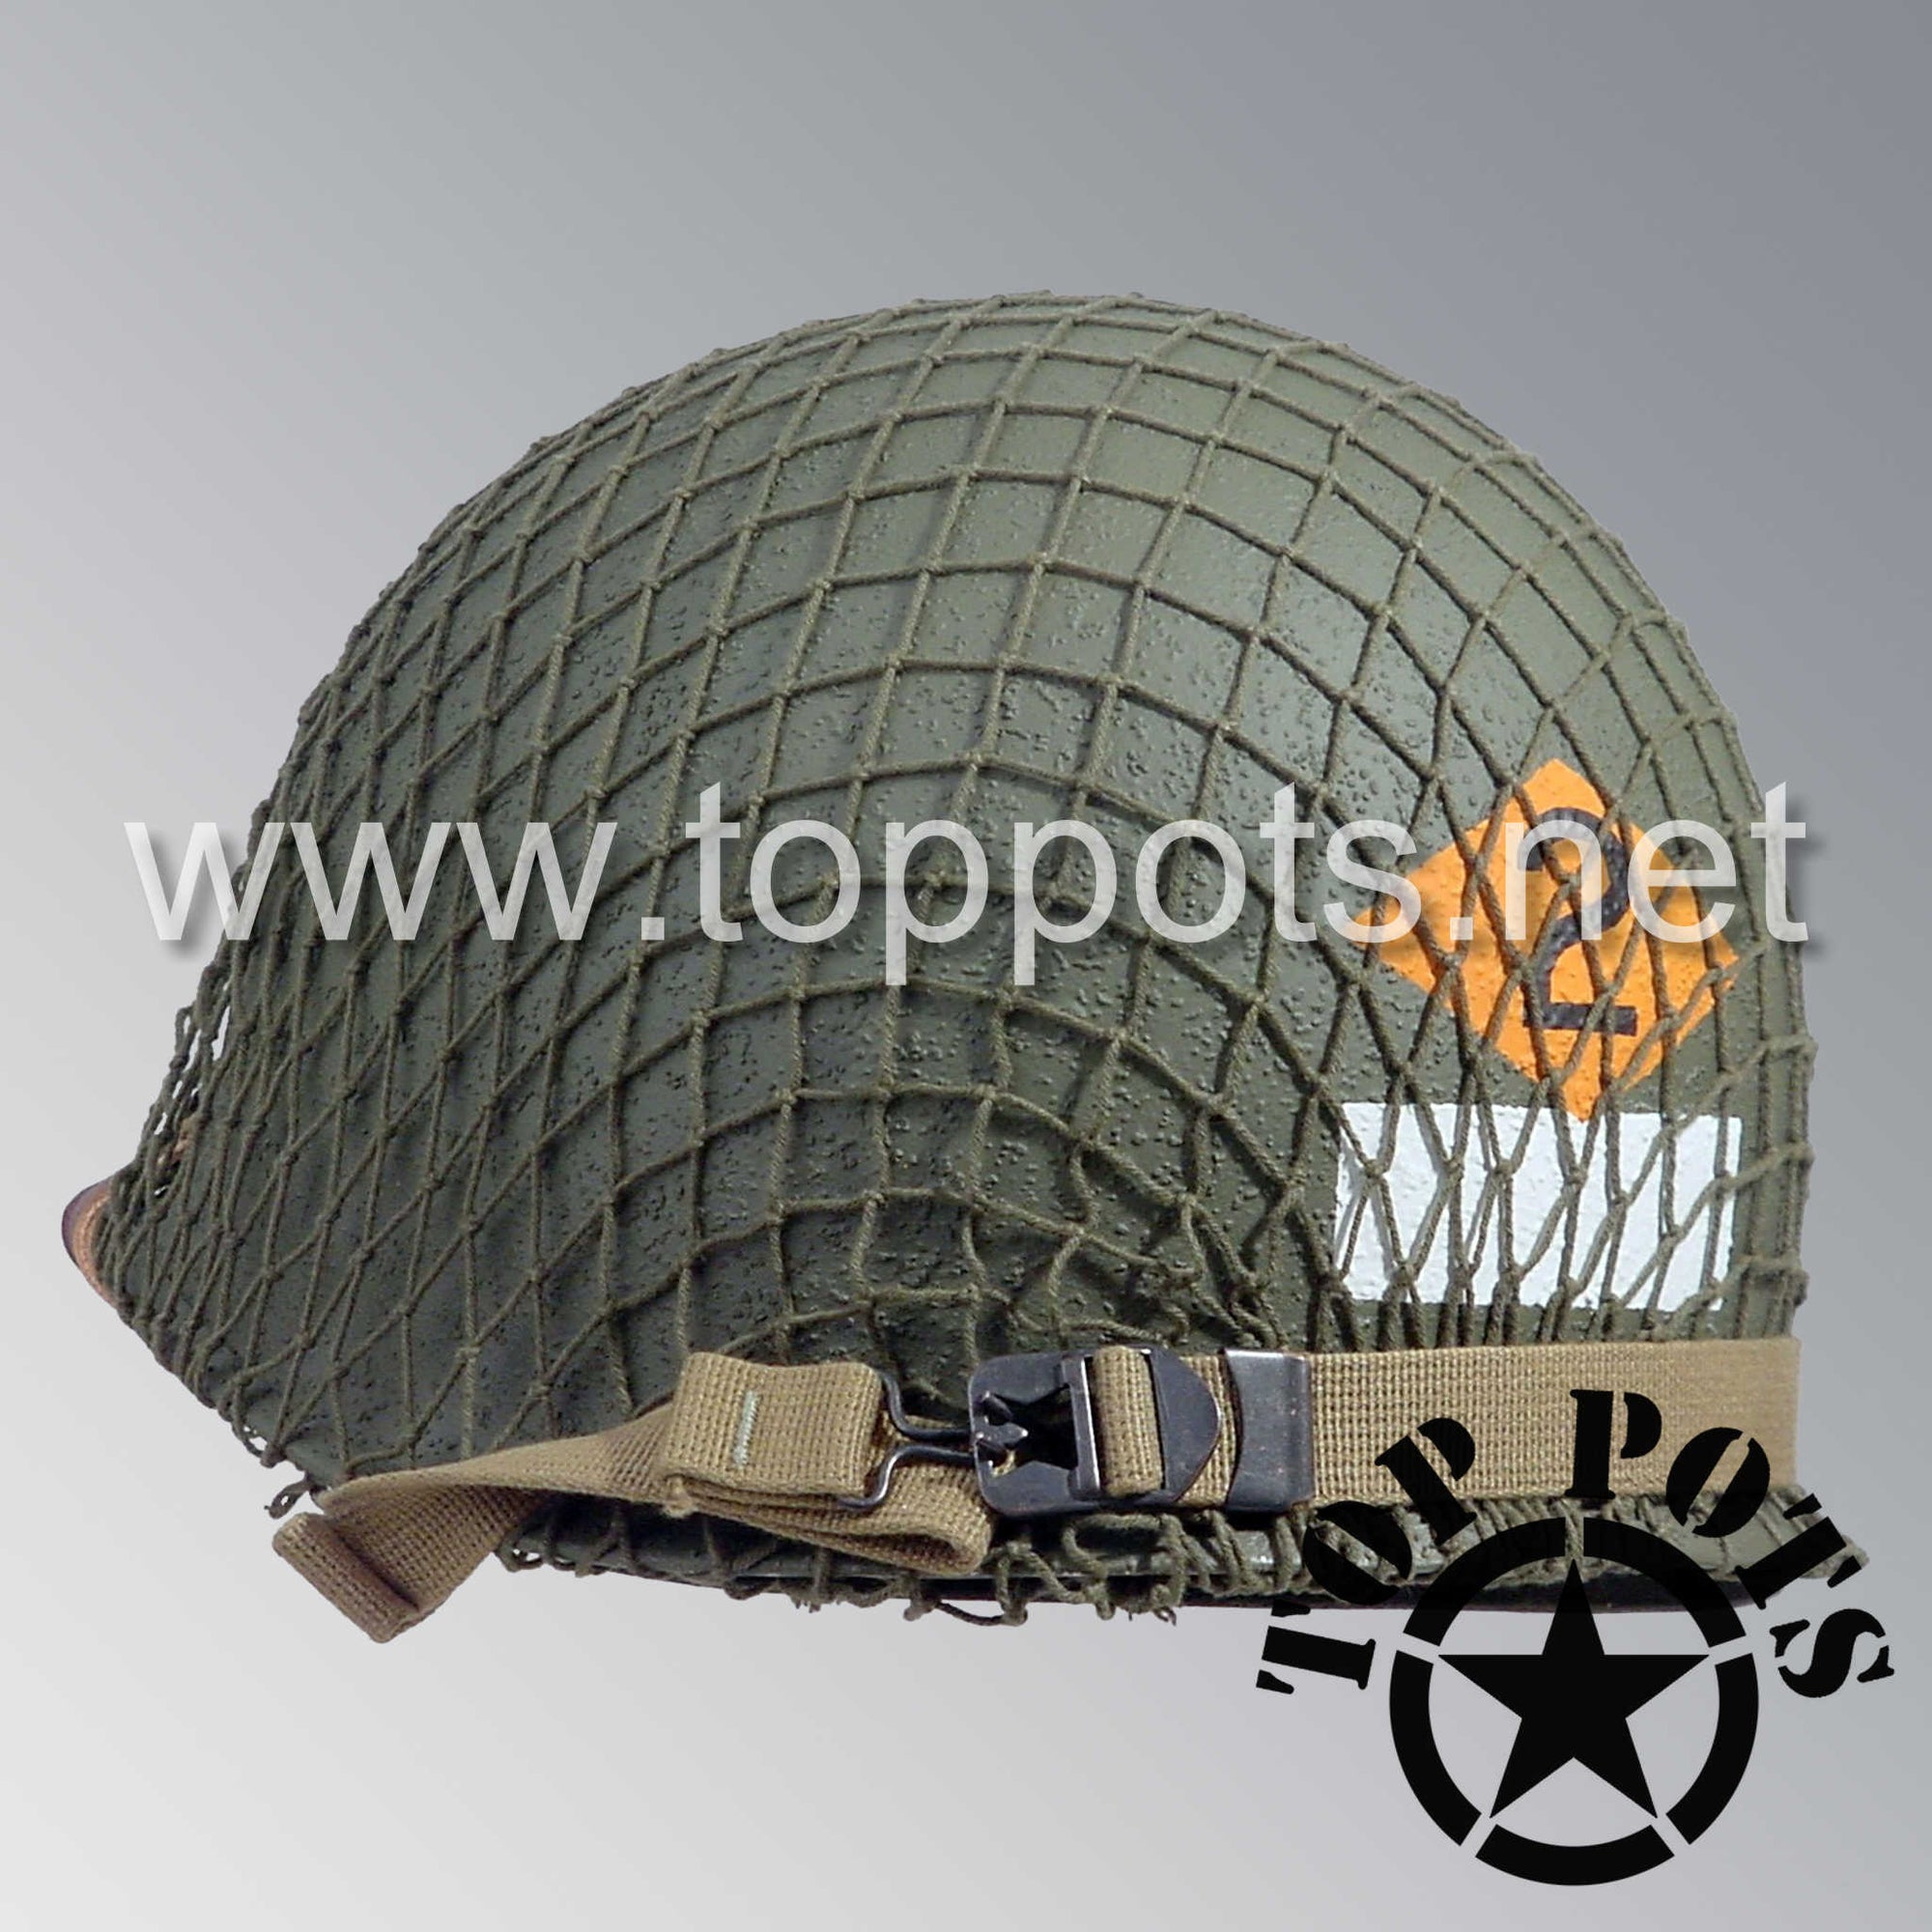 WWII US Army Restored Original M1 Infantry Helmet Swivel Bale Shell and Liner with 2nd Ranger NCO Emblem and OD 7 Net